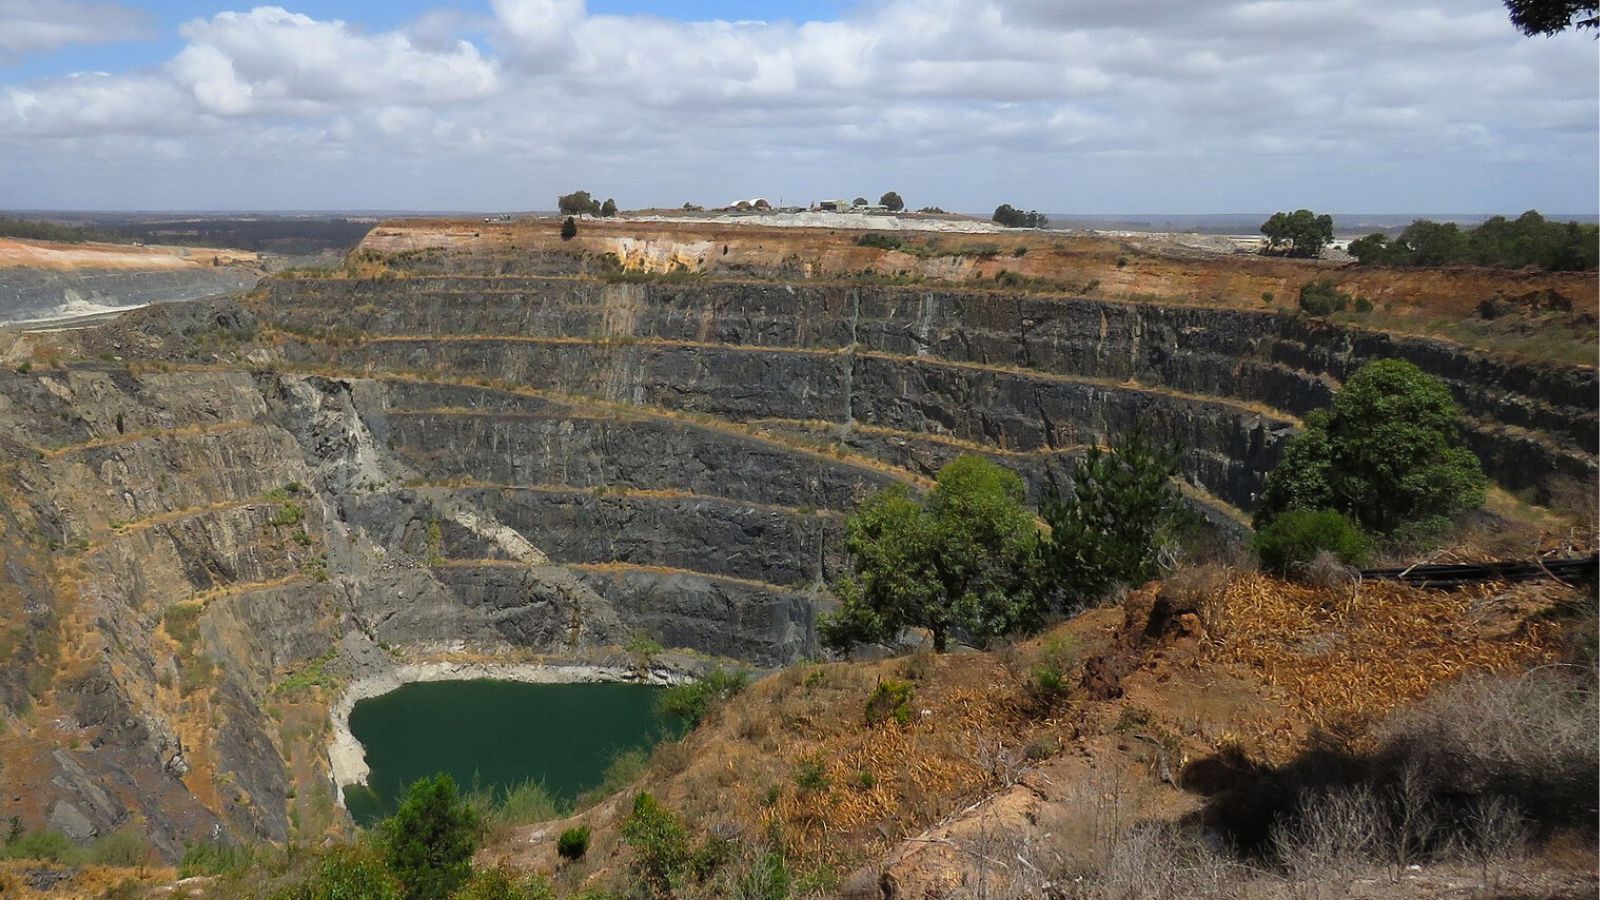 The Greenbushes mine in Western Australia is the largest hard-rock lithium mine in the world.